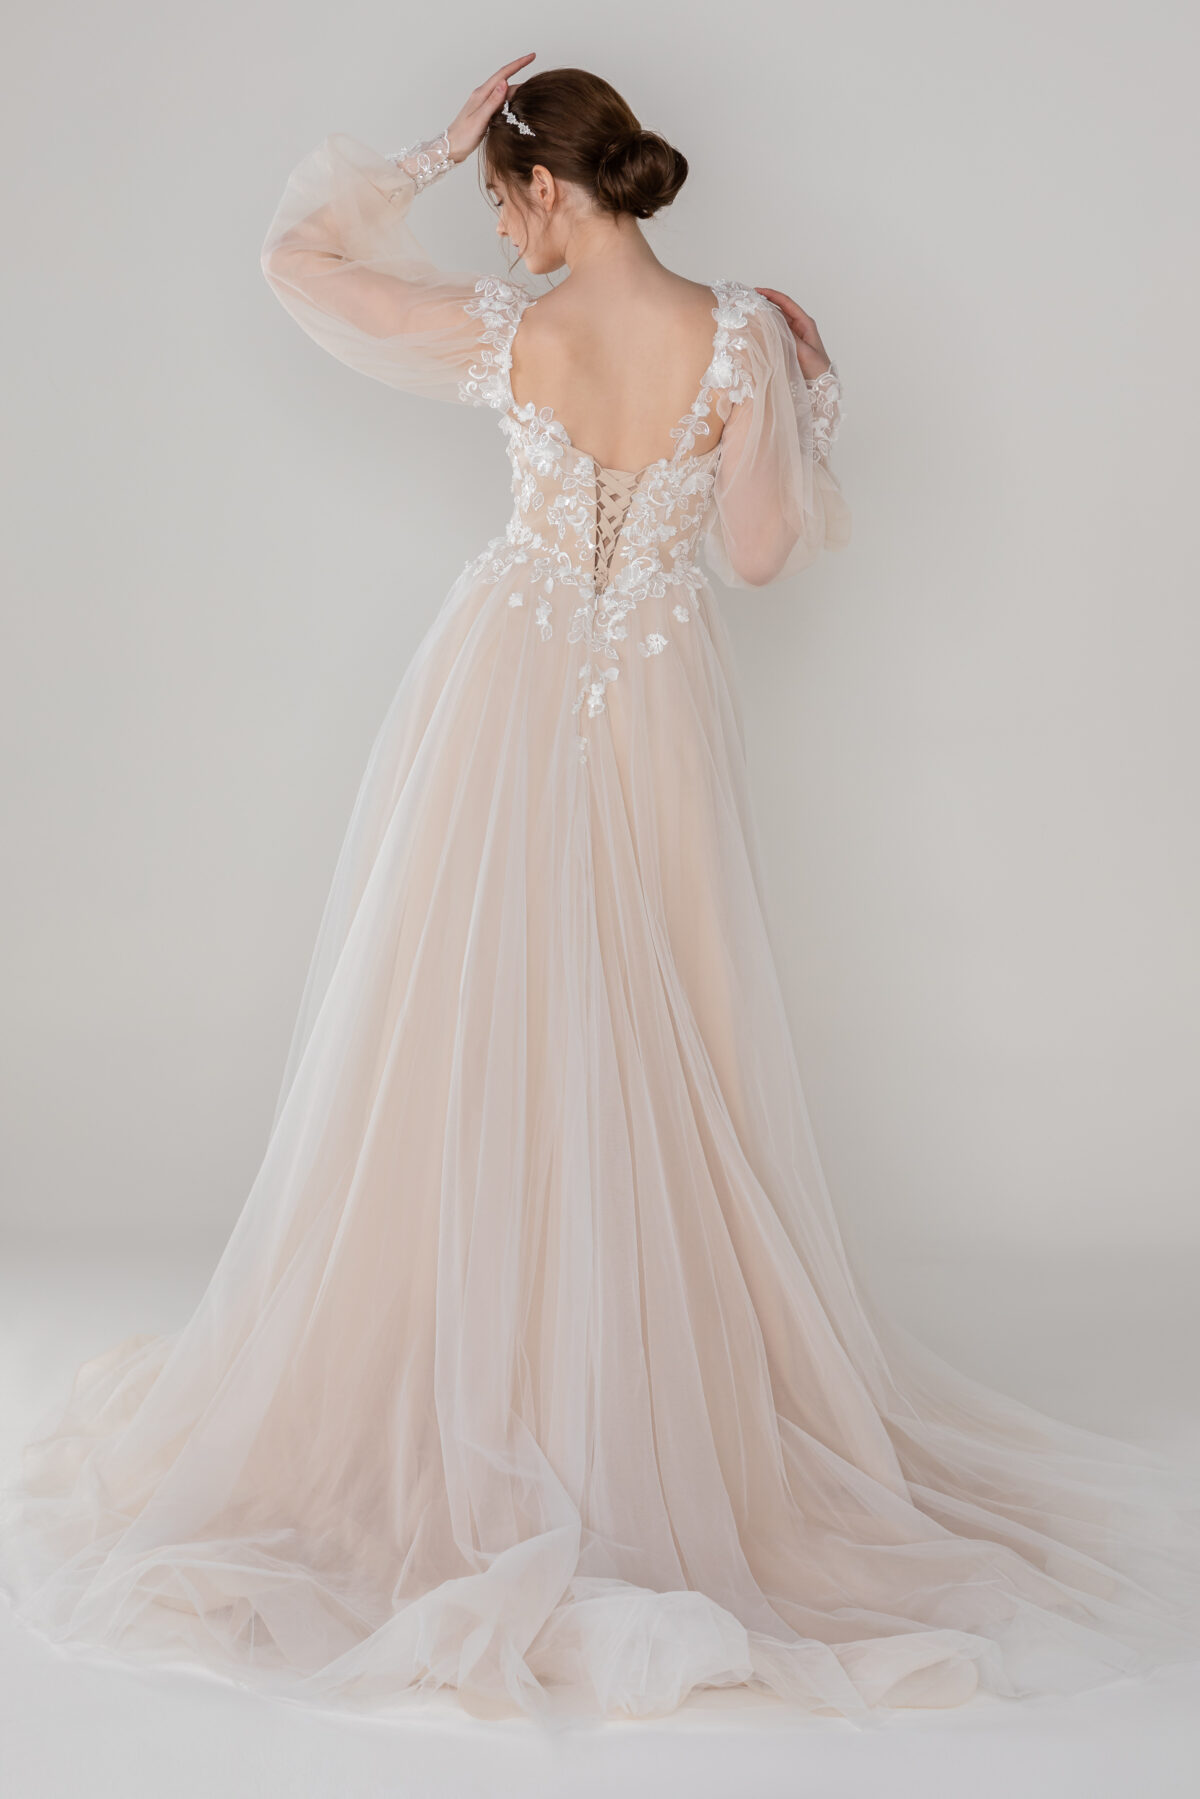 Romantic Wedding Dresses by Cocomelody - CW2533 | CAMERON